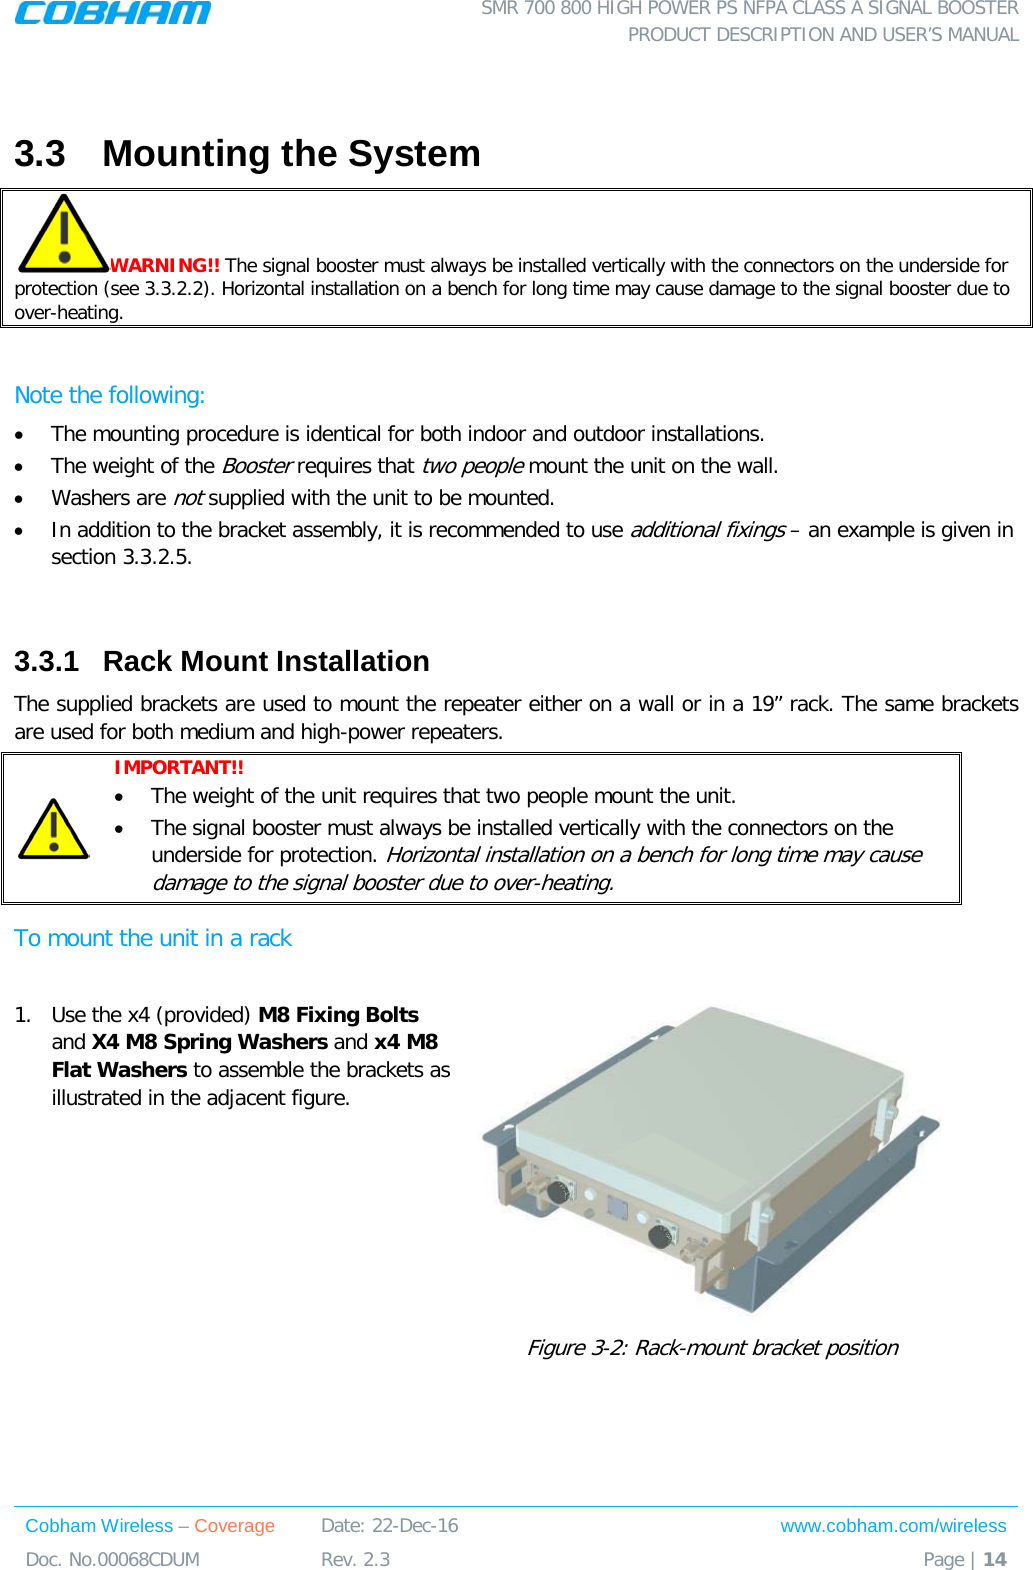  SMR 700 800 HIGH POWER PS NFPA CLASS A SIGNAL BOOSTER  PRODUCT DESCRIPTION AND USER’S MANUAL Cobham Wireless – Coverage Date: 22-Dec-16 www.cobham.com/wireless Doc. No.00068CDUM  Rev. 2.3  Page | 14   3.3  Mounting the System WARNING!! The signal booster must always be installed vertically with the connectors on the underside for protection (see  3.3.2.2). Horizontal installation on a bench for long time may cause damage to the signal booster due to over-heating.   Note the following: • The mounting procedure is identical for both indoor and outdoor installations.  • The weight of the Booster requires that two people mount the unit on the wall.  • Washers are not supplied with the unit to be mounted.   • In addition to the bracket assembly, it is recommended to use additional fixings – an example is given in section  3.3.2.5.  3.3.1  Rack Mount Installation  The supplied brackets are used to mount the repeater either on a wall or in a 19” rack. The same brackets are used for both medium and high-power repeaters.   IMPORTANT!!   • The weight of the unit requires that two people mount the unit.  • The signal booster must always be installed vertically with the connectors on the underside for protection. Horizontal installation on a bench for long time may cause damage to the signal booster due to over-heating. To mount the unit in a rack  1.  Use the x4 (provided) M8 Fixing Bolts  and X4 M8 Spring Washers and x4 M8 Flat Washers to assemble the brackets as illustrated in the adjacent figure.     Figure  3-2: Rack-mount bracket position 